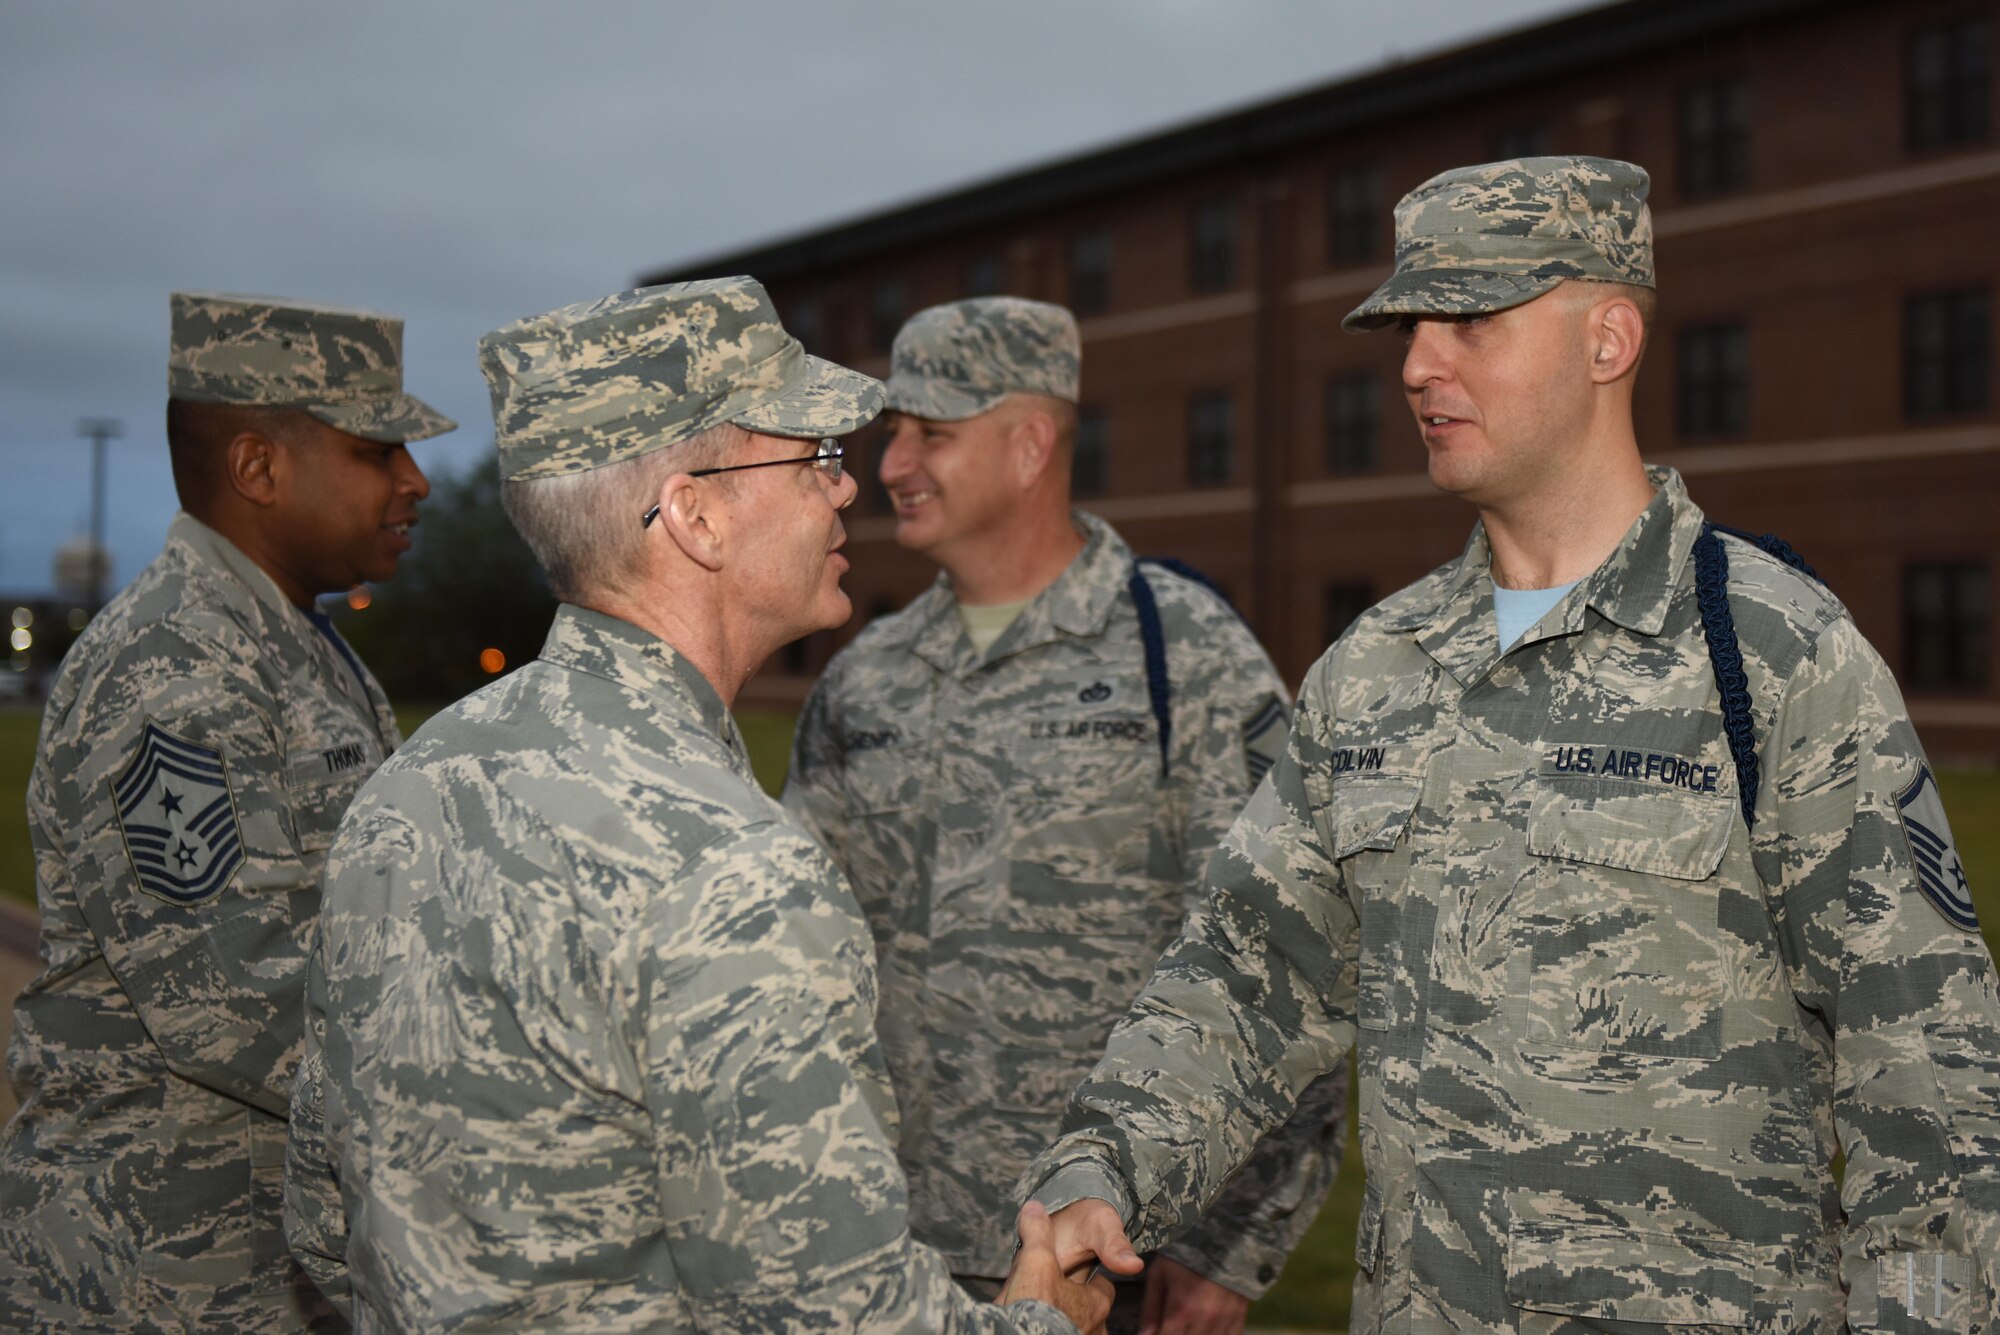 U.S. Air Force Maj. Gen. Bob LaBrutta, 2nd Air Force Commander, meets Master Sgt. Gregory Colvin, 316th Training Squadron military training leader flight chief, outside of the student dorms on Goodfellow Air Force Base, Texas, Oct. 7, 2016. During his two-day base tour, LaBrutta had a sit down session with MTLs and answered any questions they had. (U.S. Air Force photo by Airman 1st Class Caelynn Ferguson/Released)